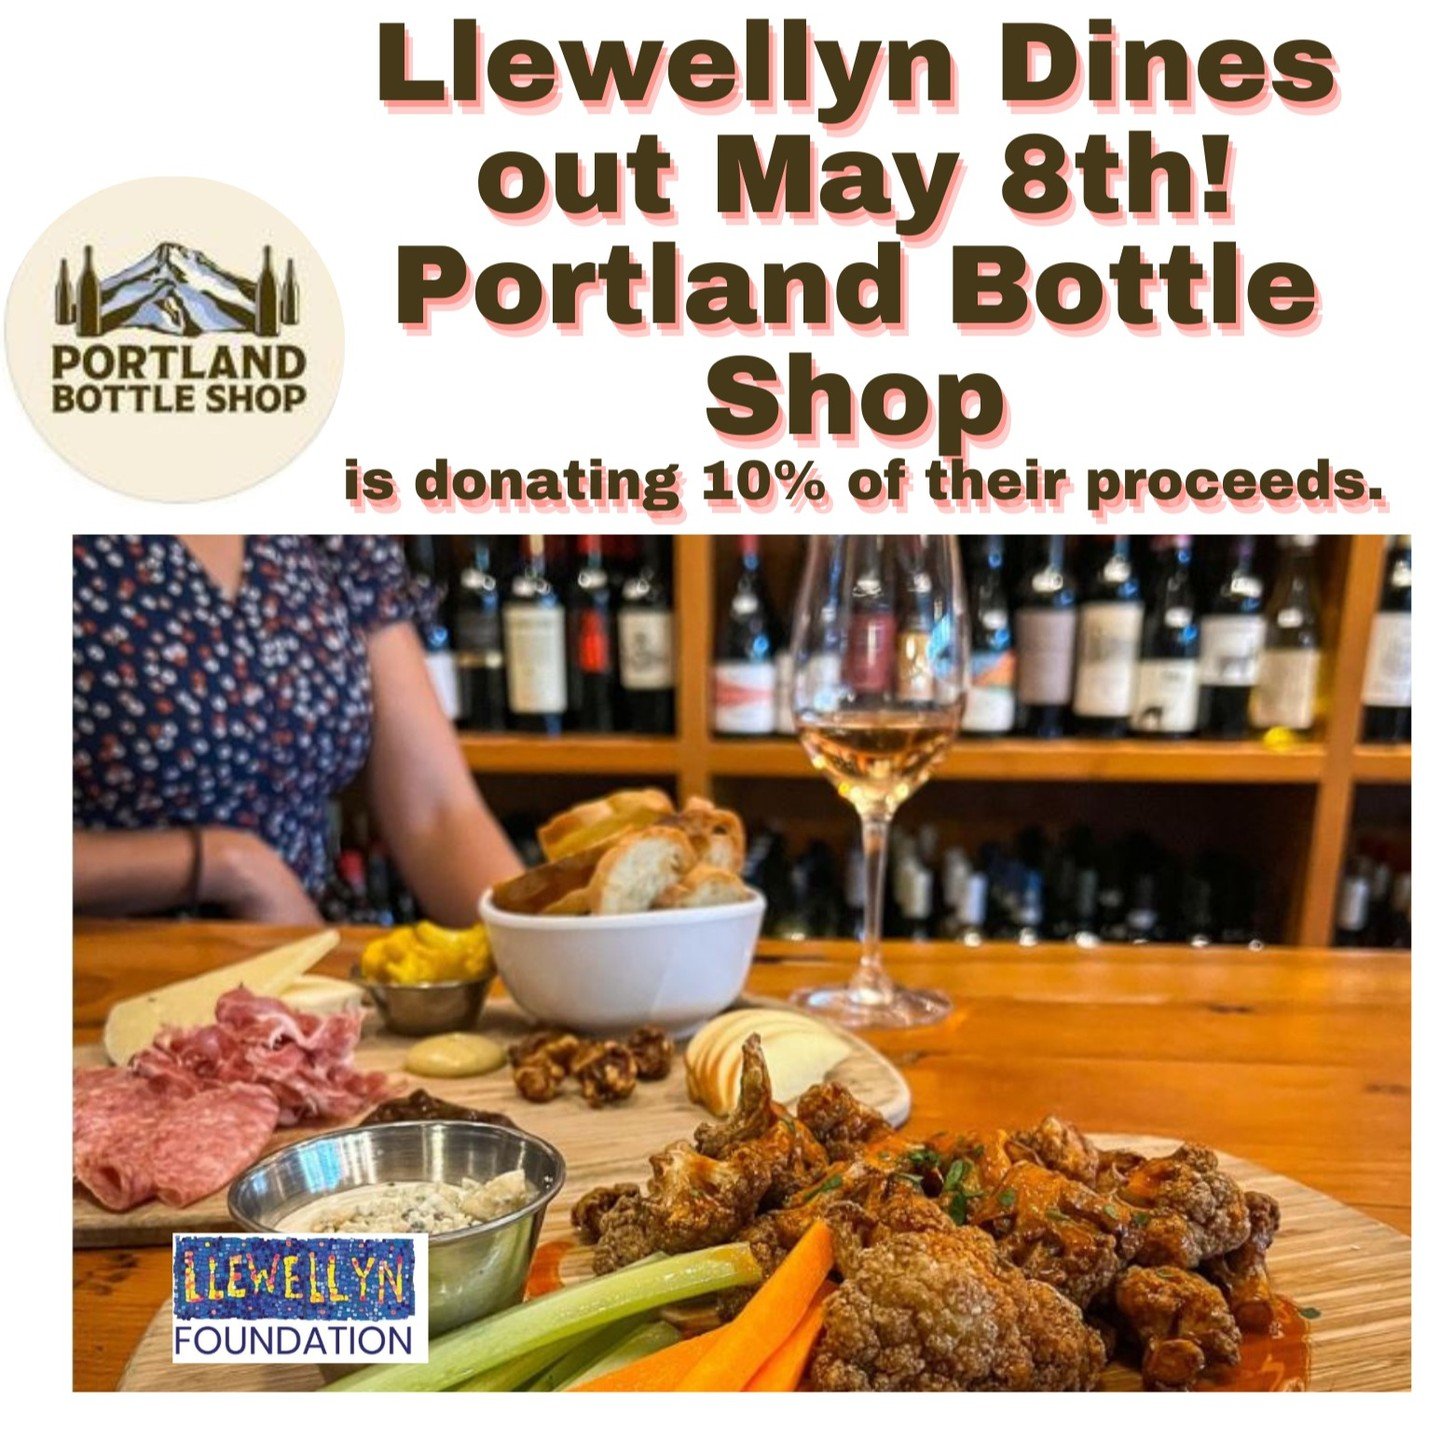 Wednesday May 8th is Dine out with @pdxbottleshop!
You wont want to miss this one! The weather is perfect to enjoy a glass of bubbles while having a bite.
10% of proceeds will be donated to the Llewellyn Foundation.